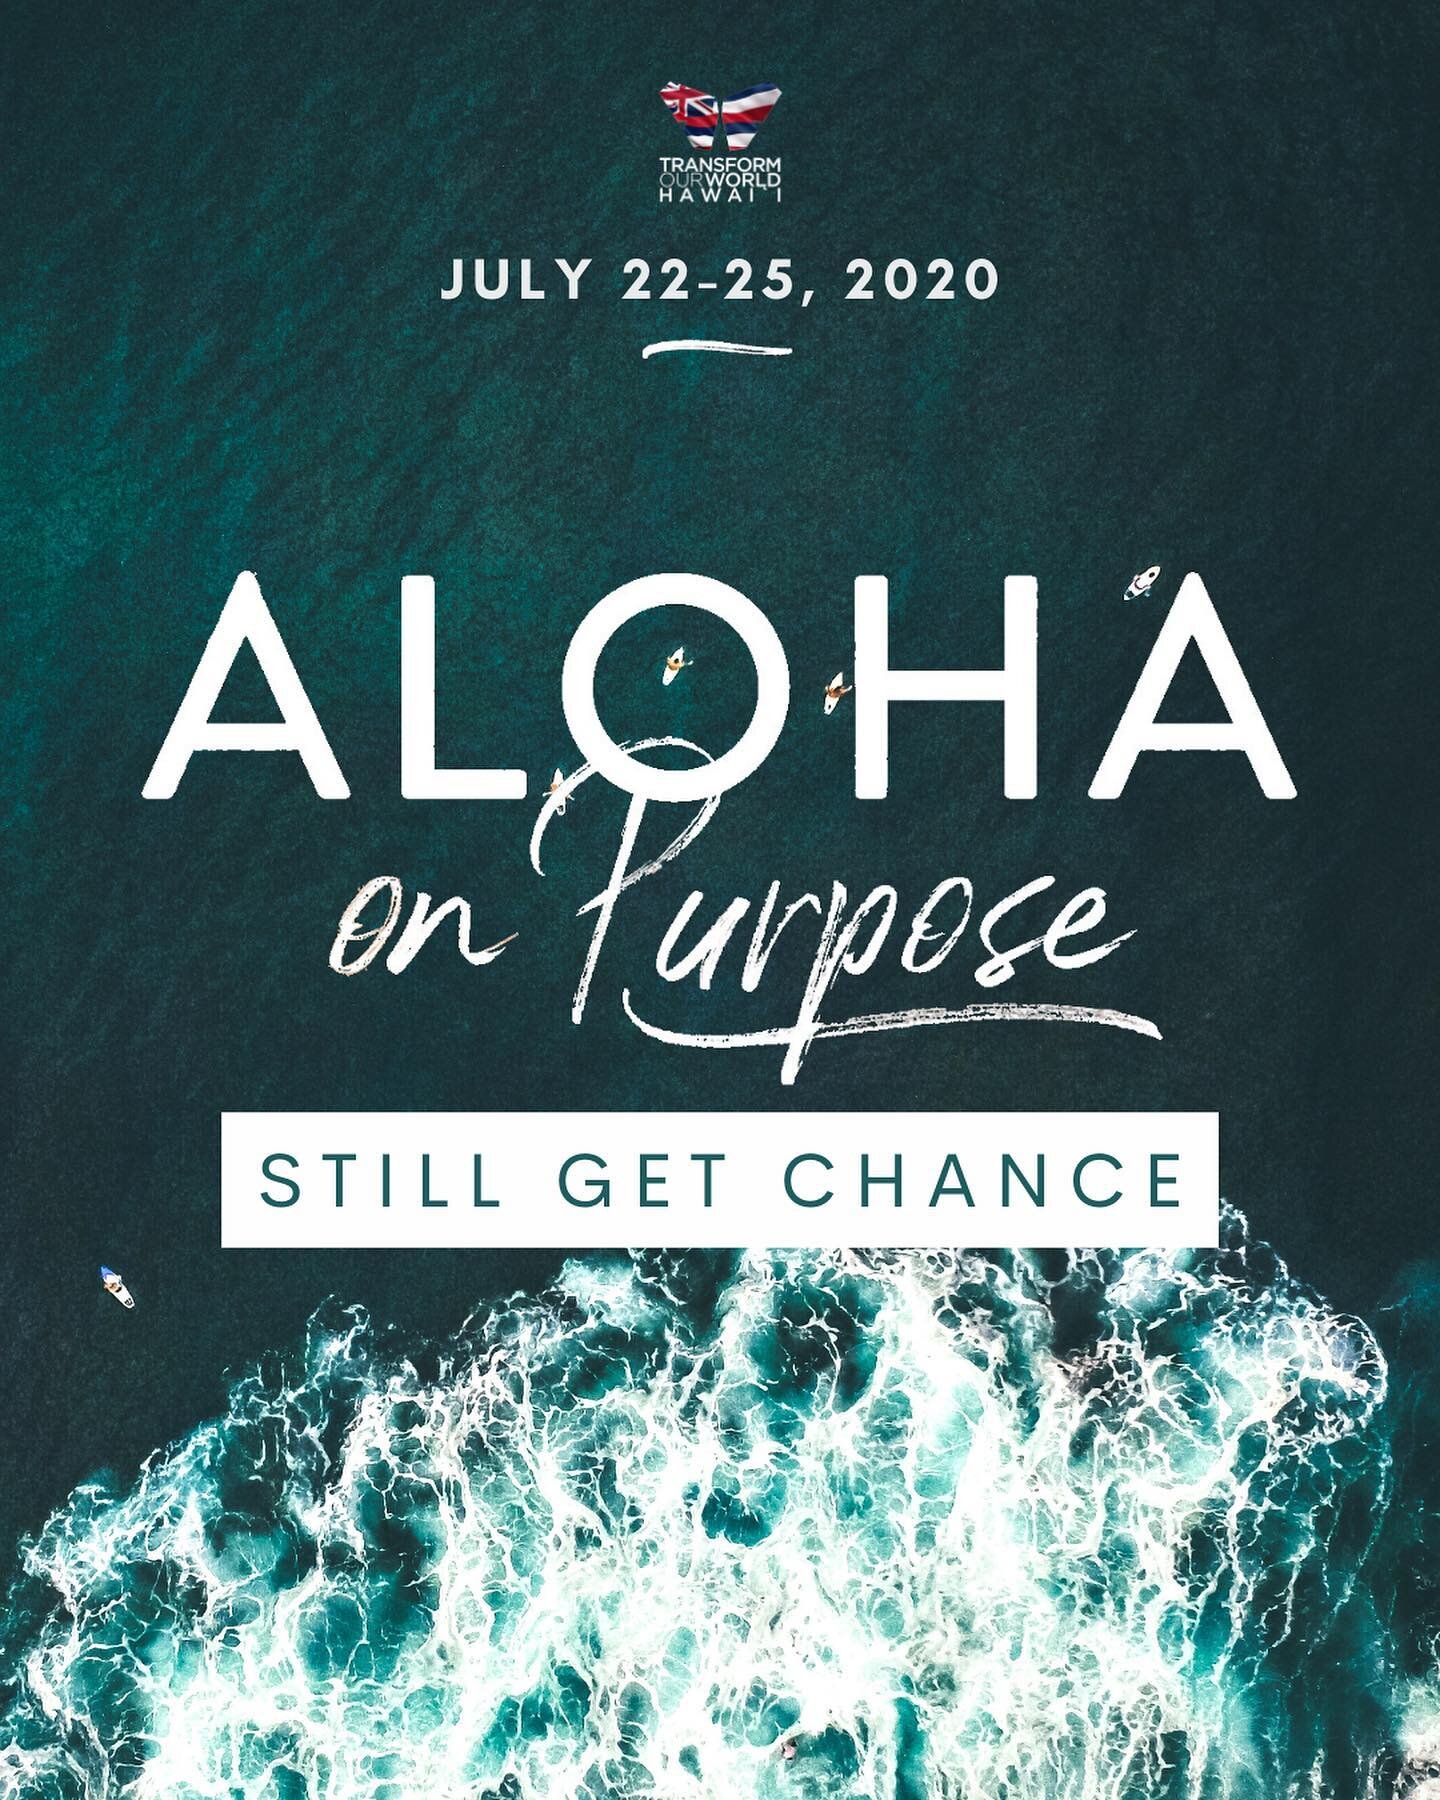 See you tonight for DAY 3 of the ALOHA ON PURPOSE: Still Get Chance Celebration! Tonight we have Barrett Awai &amp; Kaulana, Da braddahs &amp; Dawn O&rsquo;Brien, Pastor Allen Cardines &amp; Pastor Ellie Kapihe sharing! Join us for the great music &a